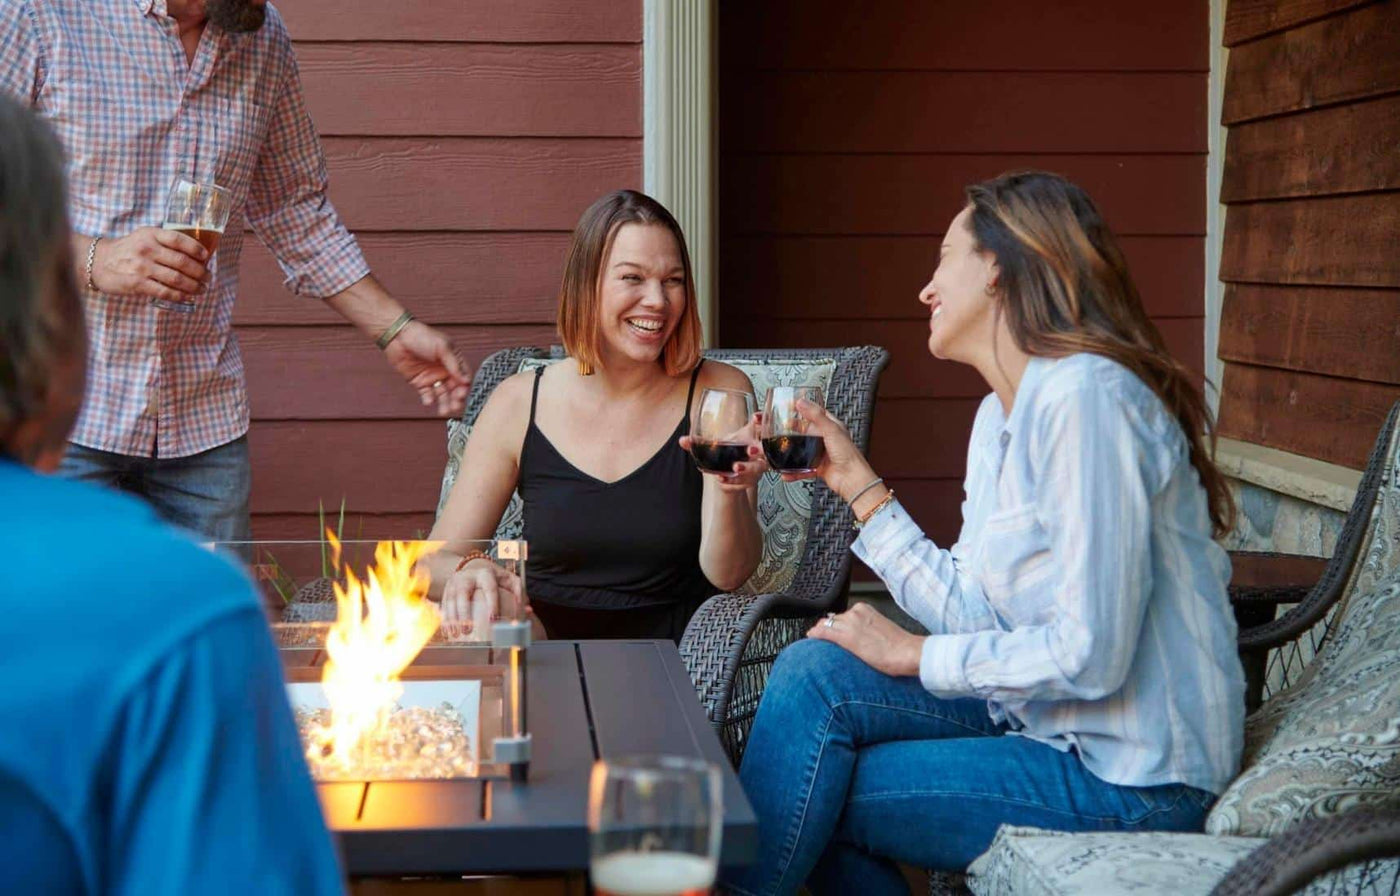 Individuals gathered around a fire pit table and enjoy a drink and conversation